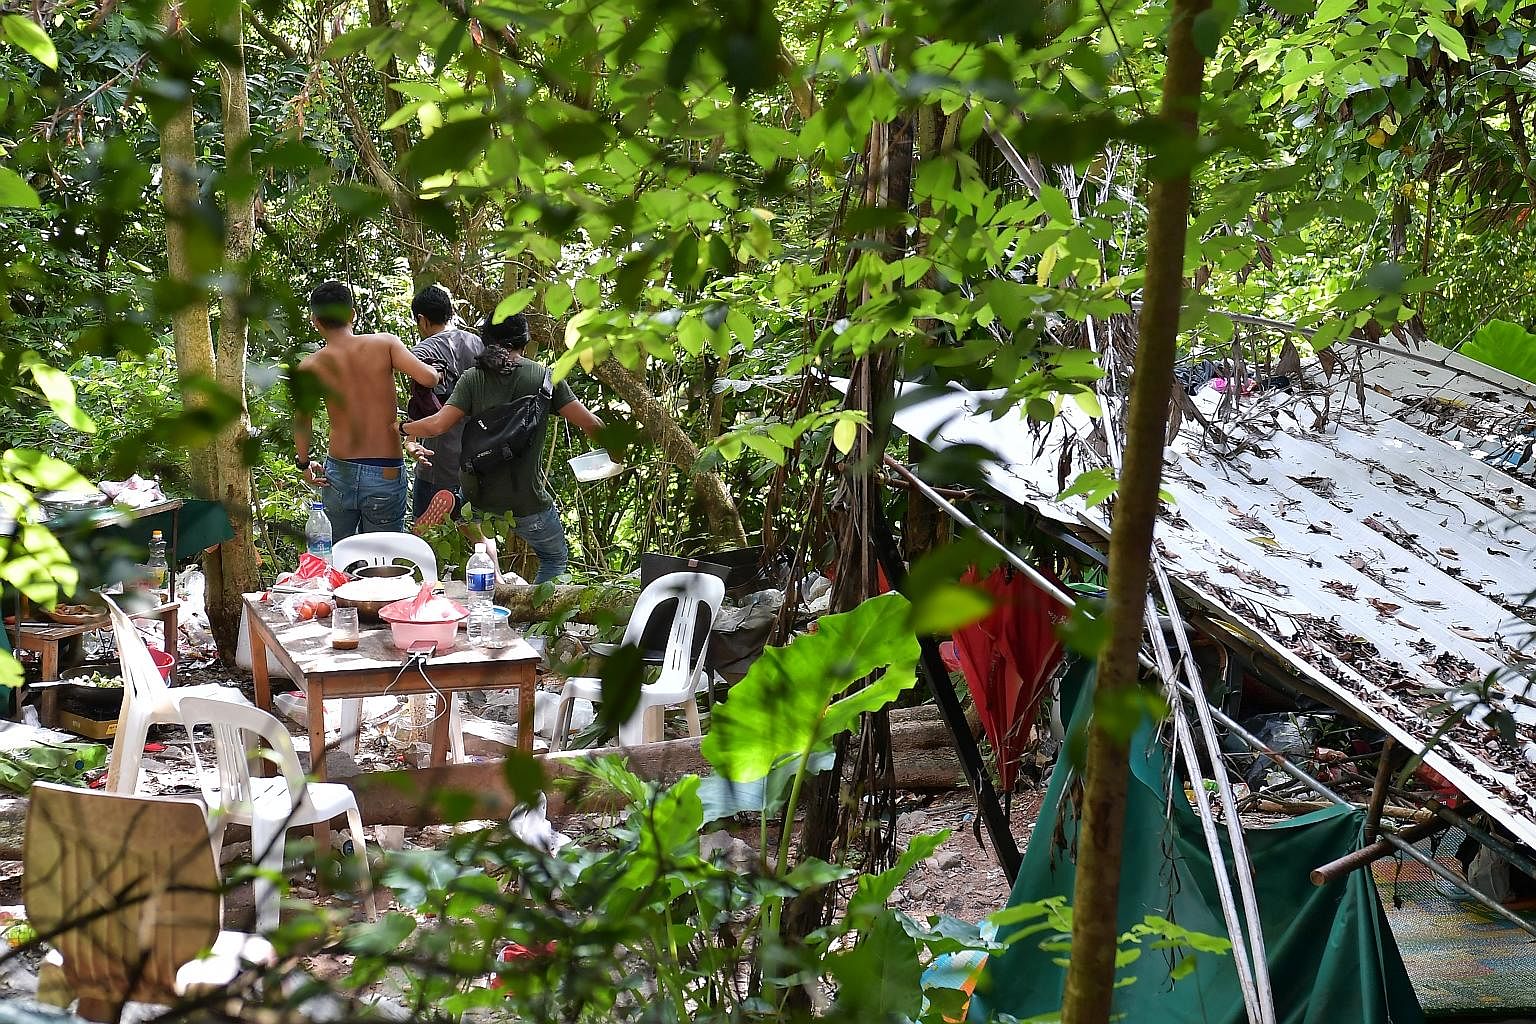 Suspected illegal immigrants fleeing down the slope from their forested hideout - located between the KJE and a slip road leading to Woodlands - after they spotted the ST team on Dec 27 last year. In their escape, they left their mobile phones on the